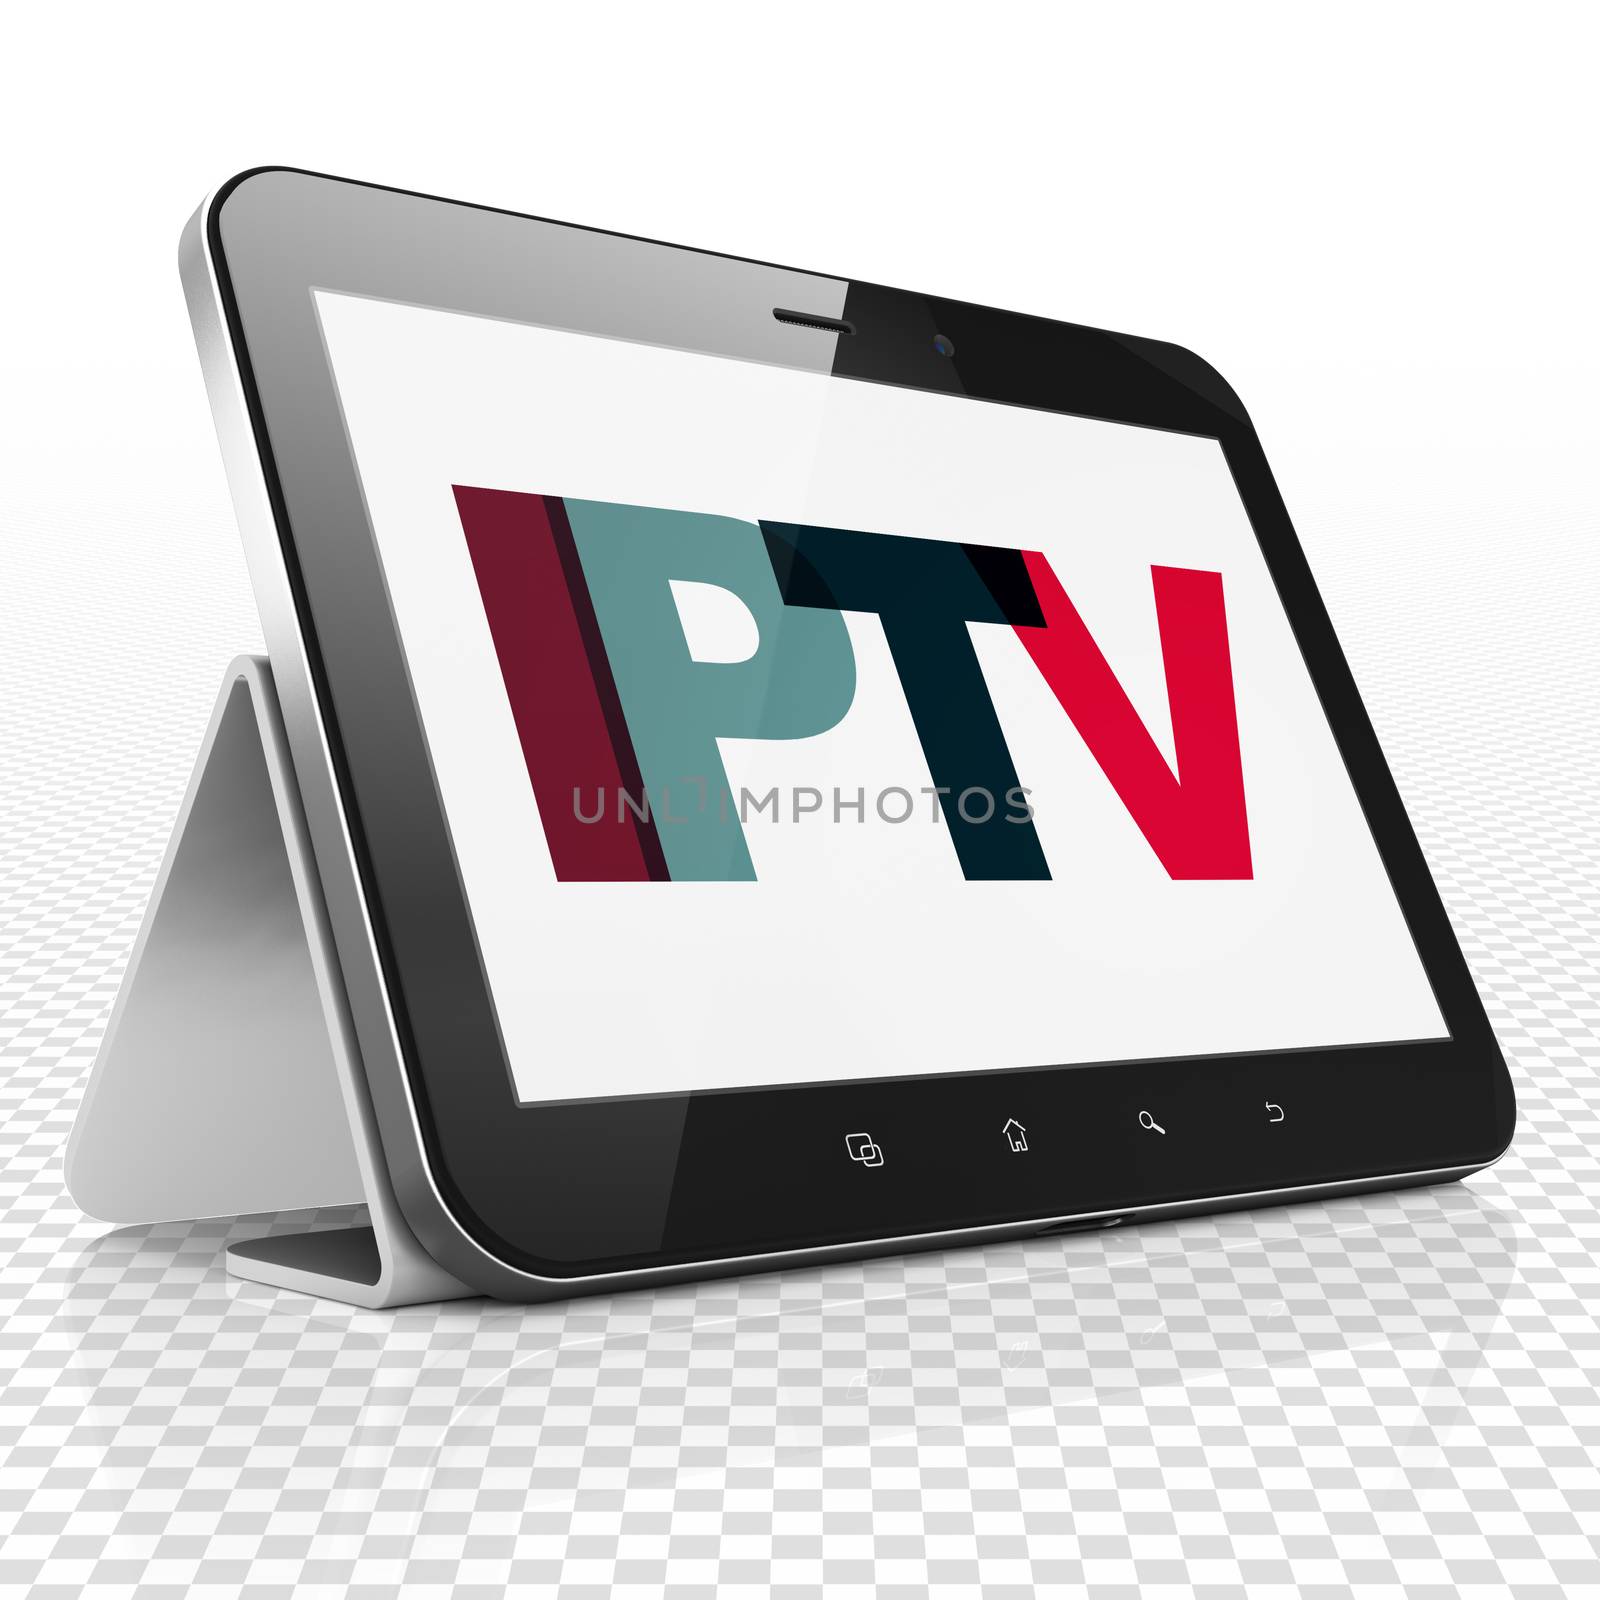 Web design concept: Tablet Computer with Painted multicolor text IPTV on display, 3D rendering